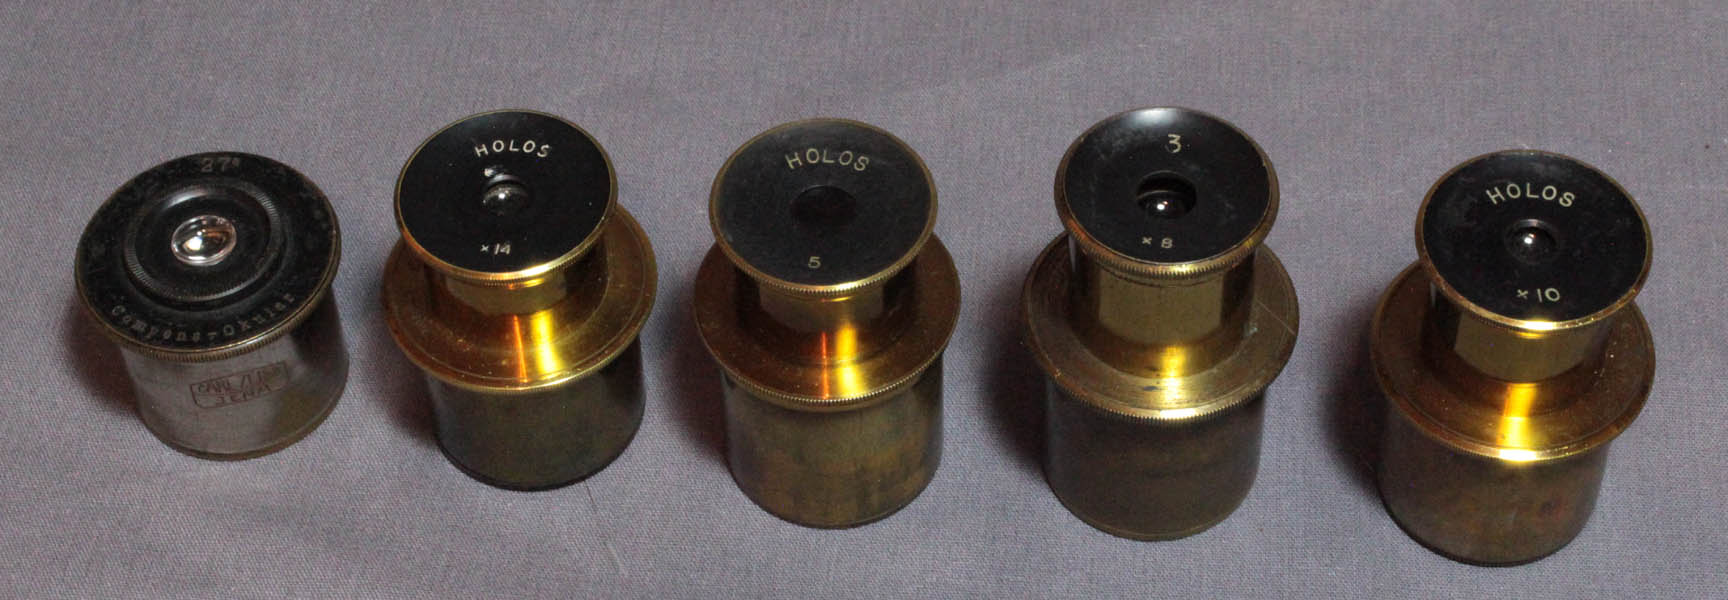 Nelson 1a  microscope eyepieces